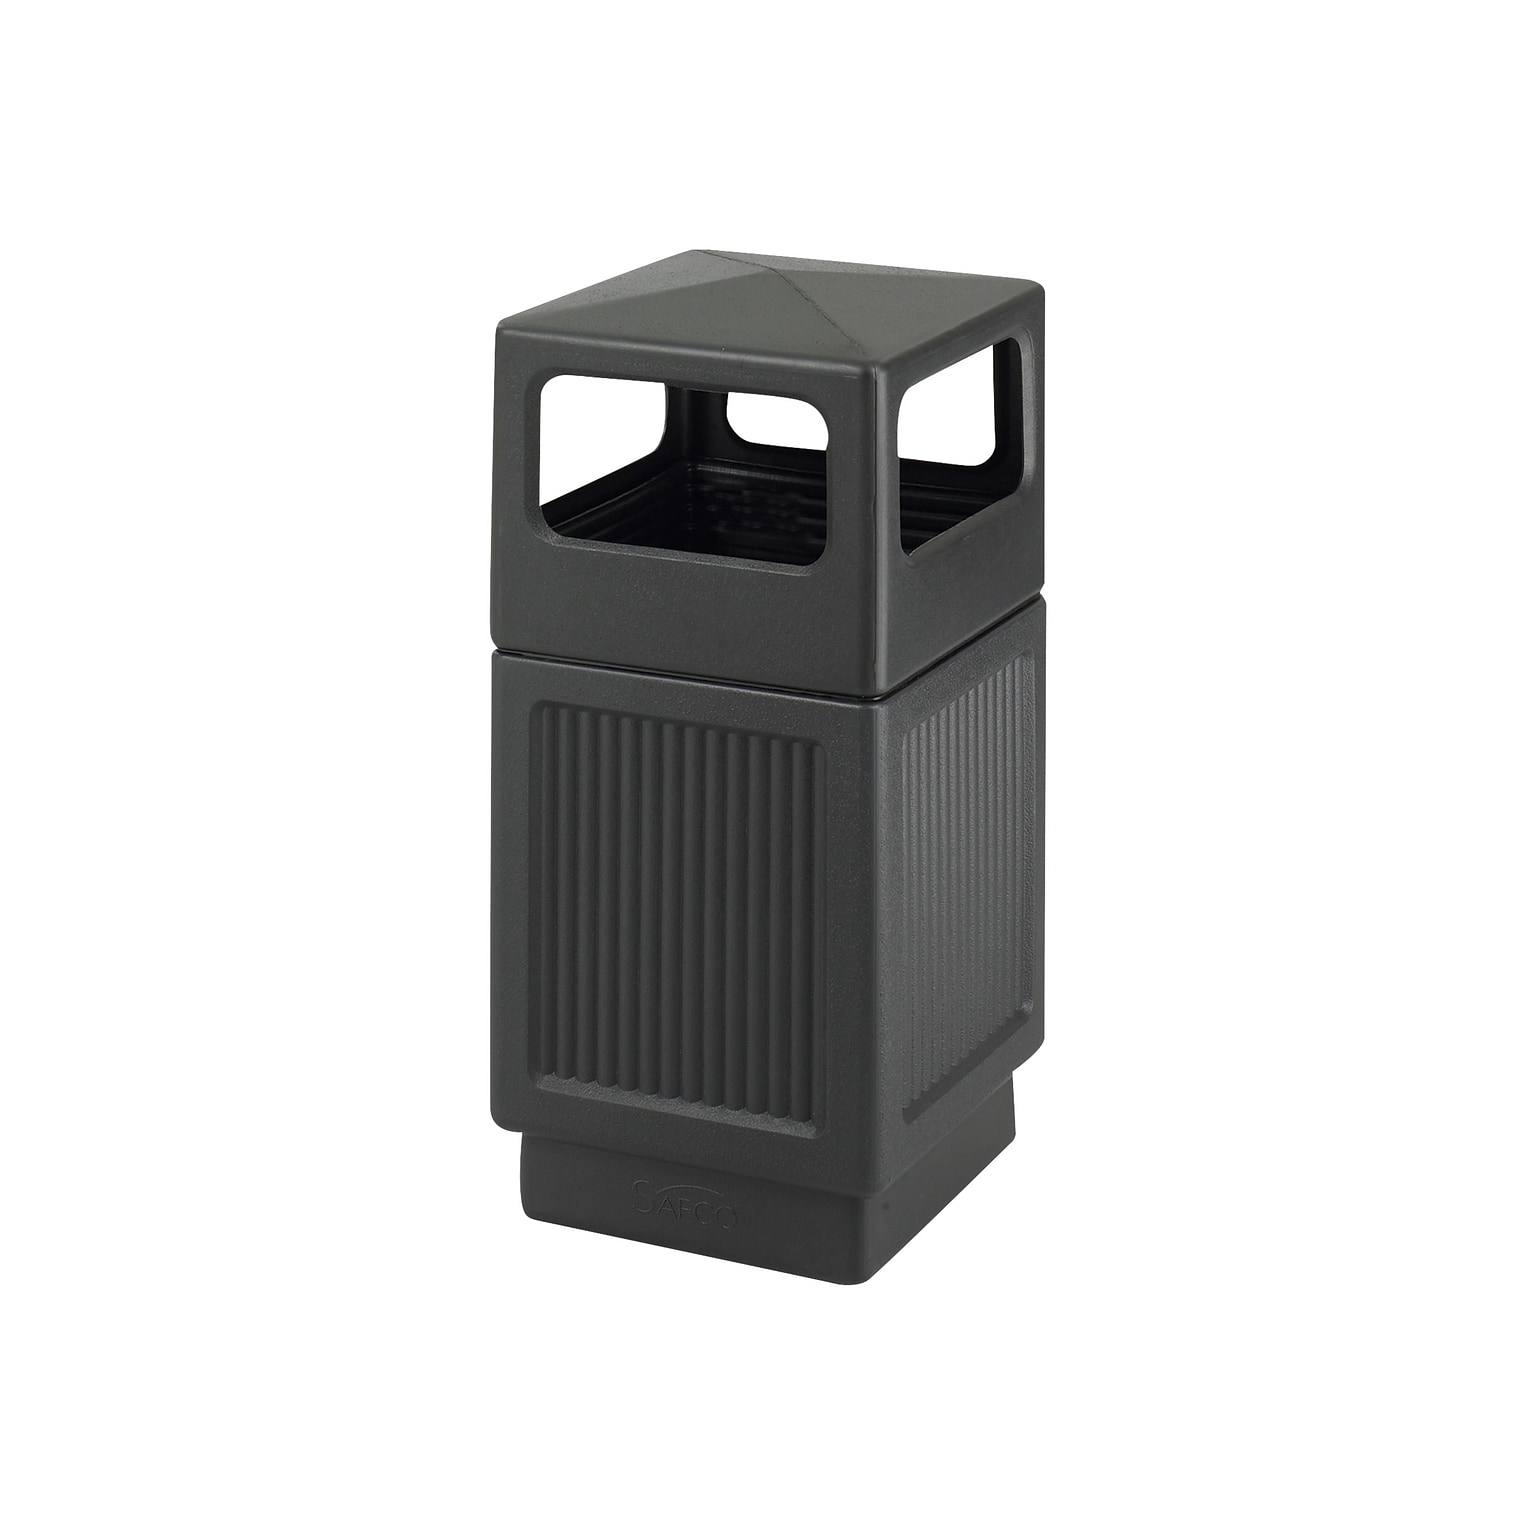 Safco Canmeleon Indoor/Outdoor Trash Cans w/Lid, Black High-Density Polyethylene/HDPE, 38 Gal. (9476BL)